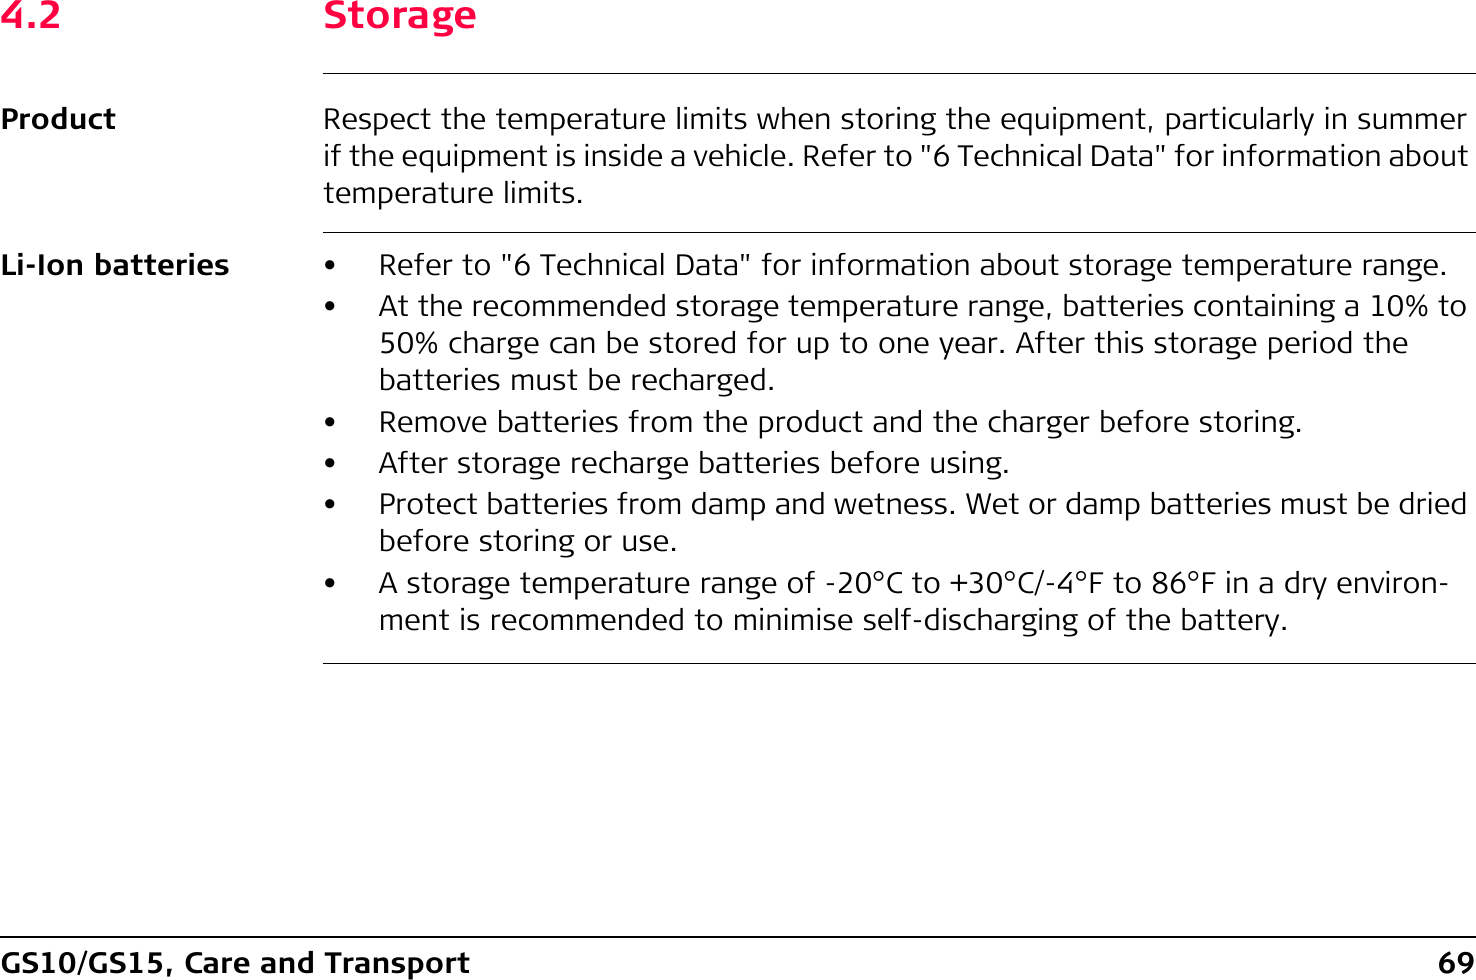 GS10/GS15, Care and Transport 694.2 StorageProduct Respect the temperature limits when storing the equipment, particularly in summer if the equipment is inside a vehicle. Refer to &quot;6 Technical Data&quot; for information about temperature limits.Li-Ion batteries • Refer to &quot;6 Technical Data&quot; for information about storage temperature range.• At the recommended storage temperature range, batteries containing a 10% to 50% charge can be stored for up to one year. After this storage period the batteries must be recharged.• Remove batteries from the product and the charger before storing.• After storage recharge batteries before using.• Protect batteries from damp and wetness. Wet or damp batteries must be dried before storing or use.• A storage temperature range of -20°C to +30°C/-4°F to 86°F in a dry environ-ment is recommended to minimise self-discharging of the battery.